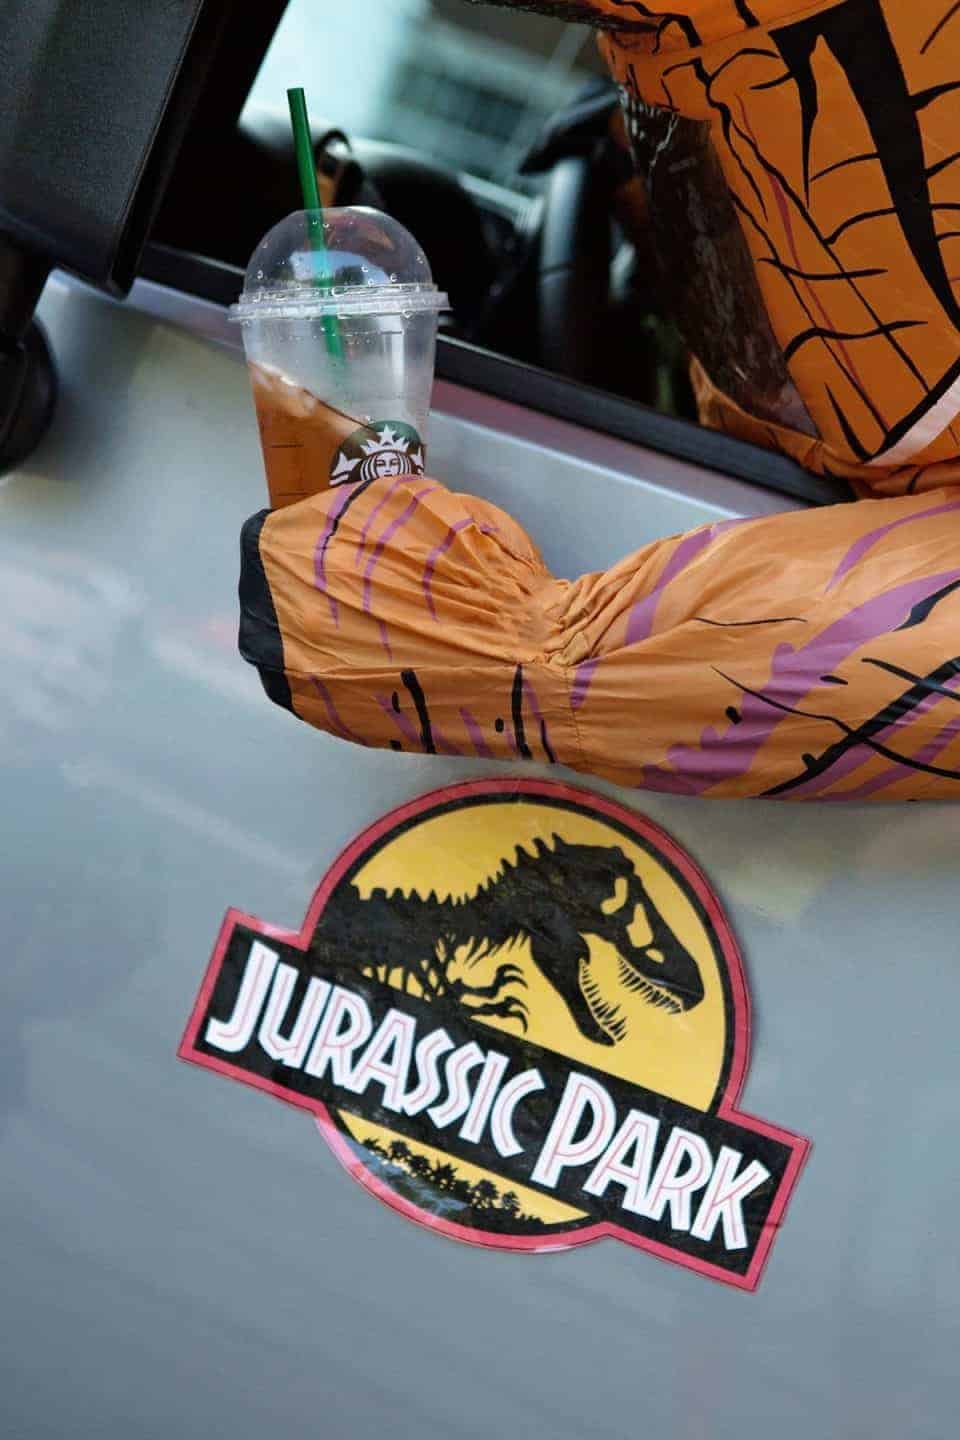 Back to School with Jurassic Park